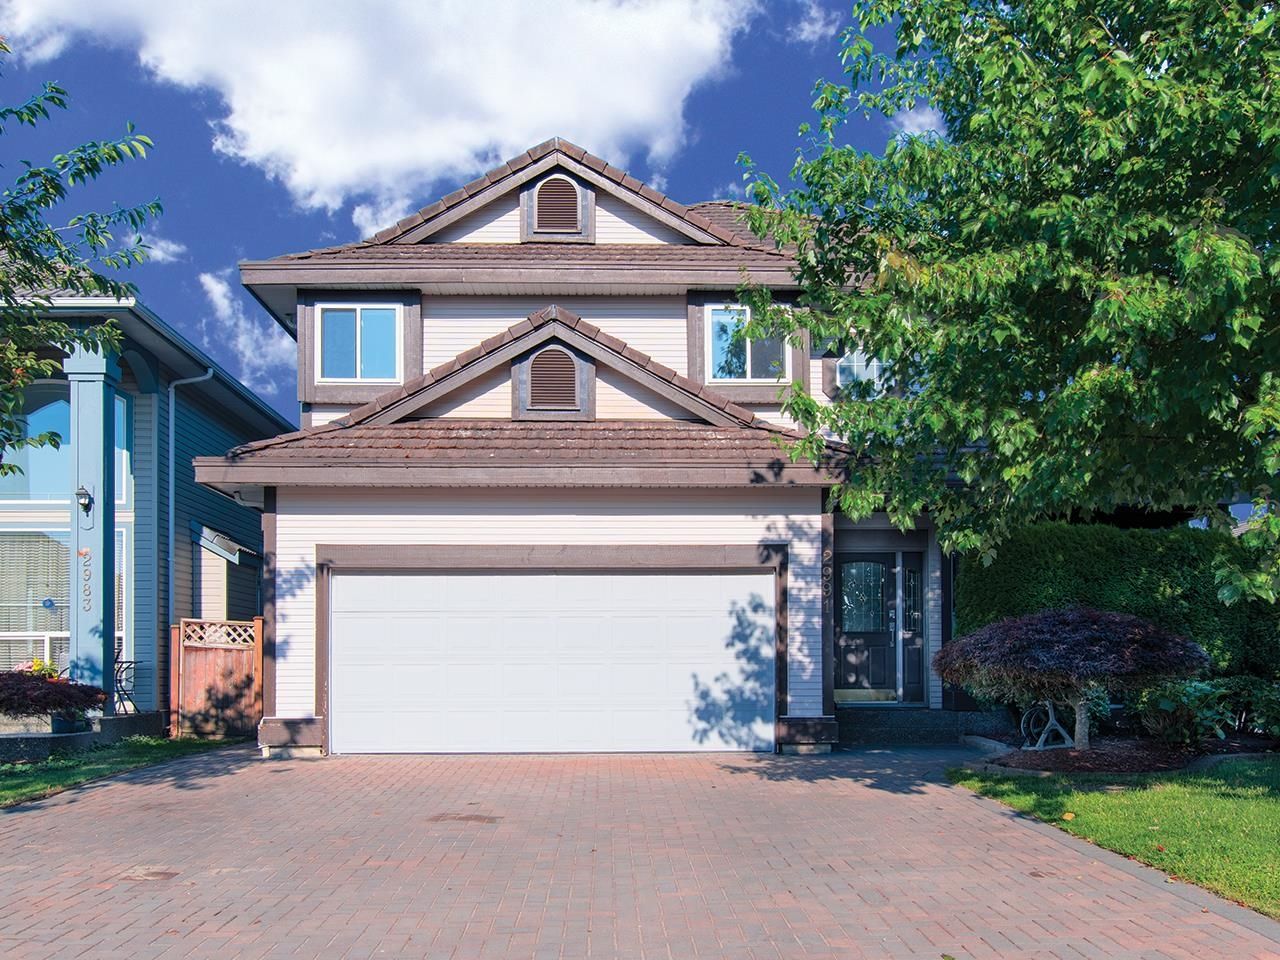 Open House. Open House on Saturday, August 6, 2022 2:00PM - 4:00PM
Welcome to YOUR Easy Lifestyle Home! 4 Bedrooms + den in this beautiful 2-storey, 2,480 sf house with a low-maintenance exterior, private yard guarded by trees! TOO MUCH TO FIT HERE! Start